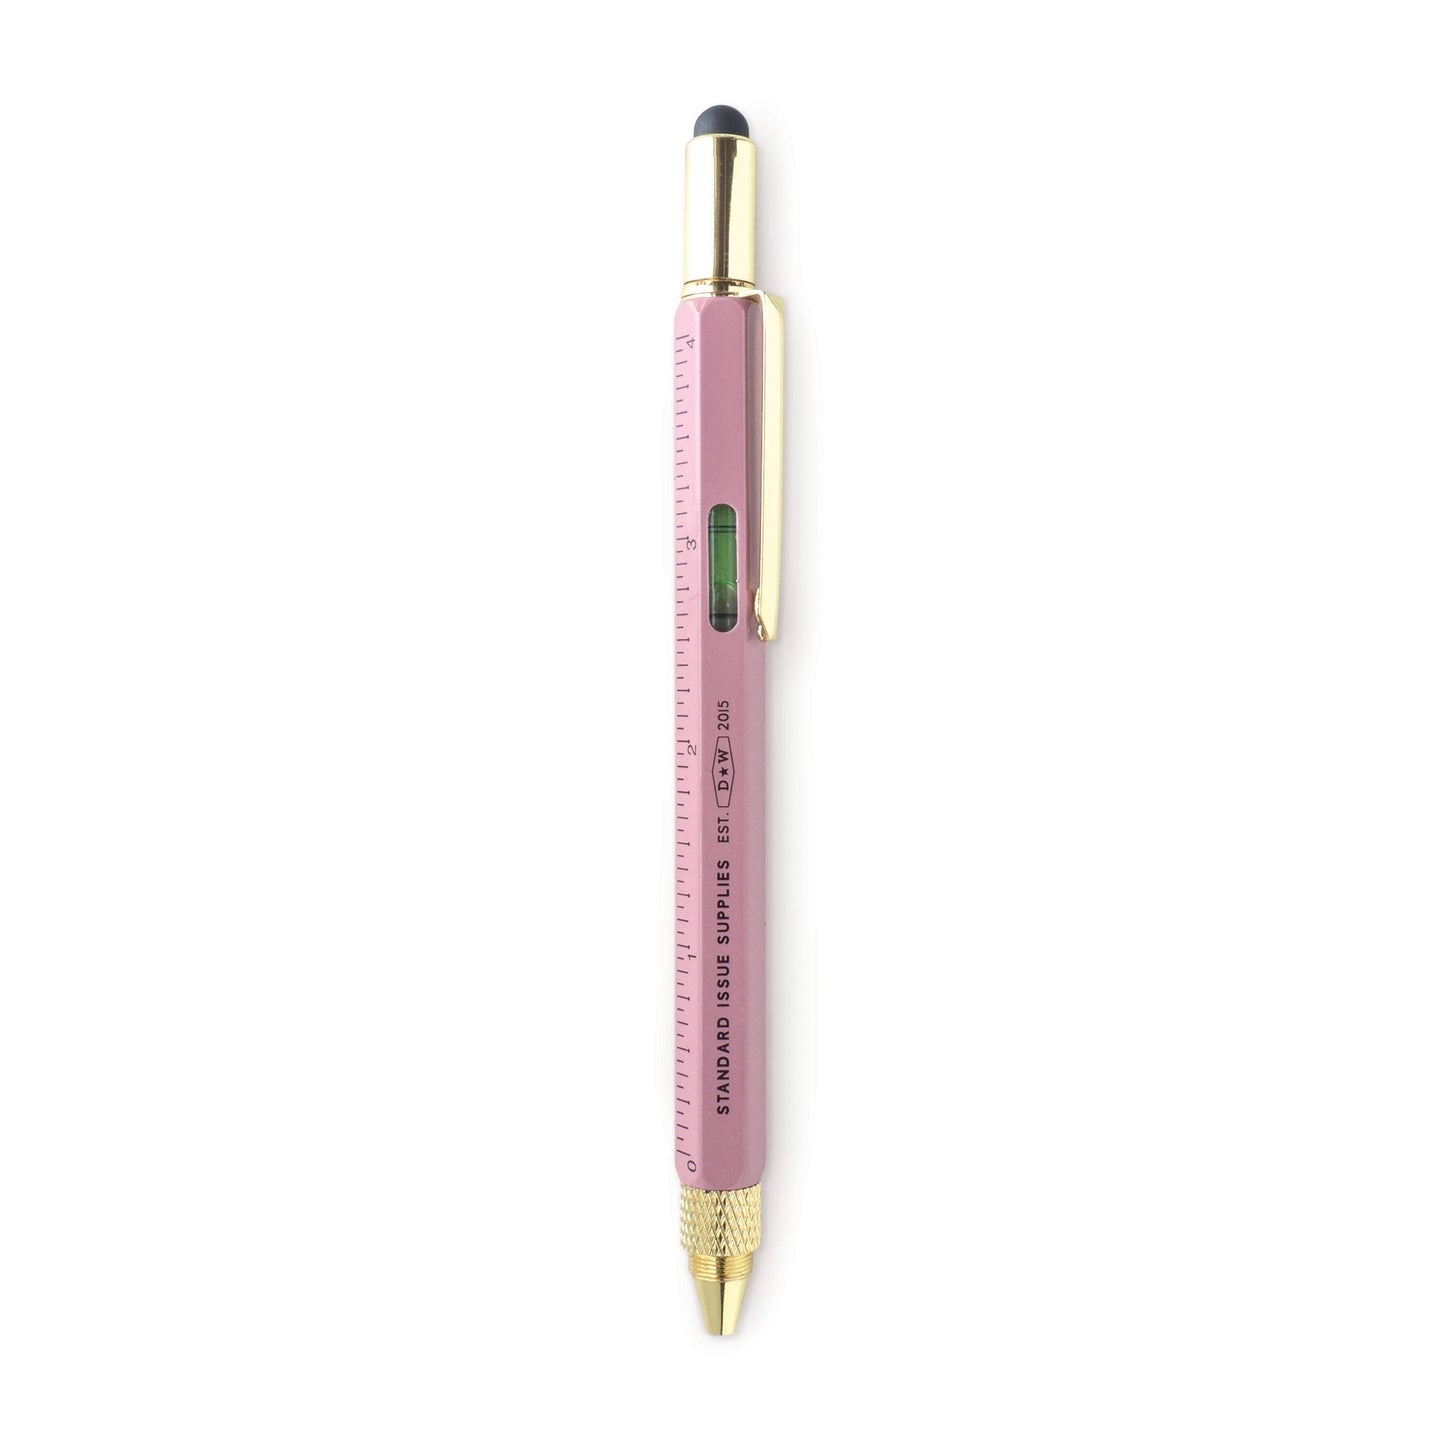 Pink tool multi function tool pen from the Pencil Me In stationery shop